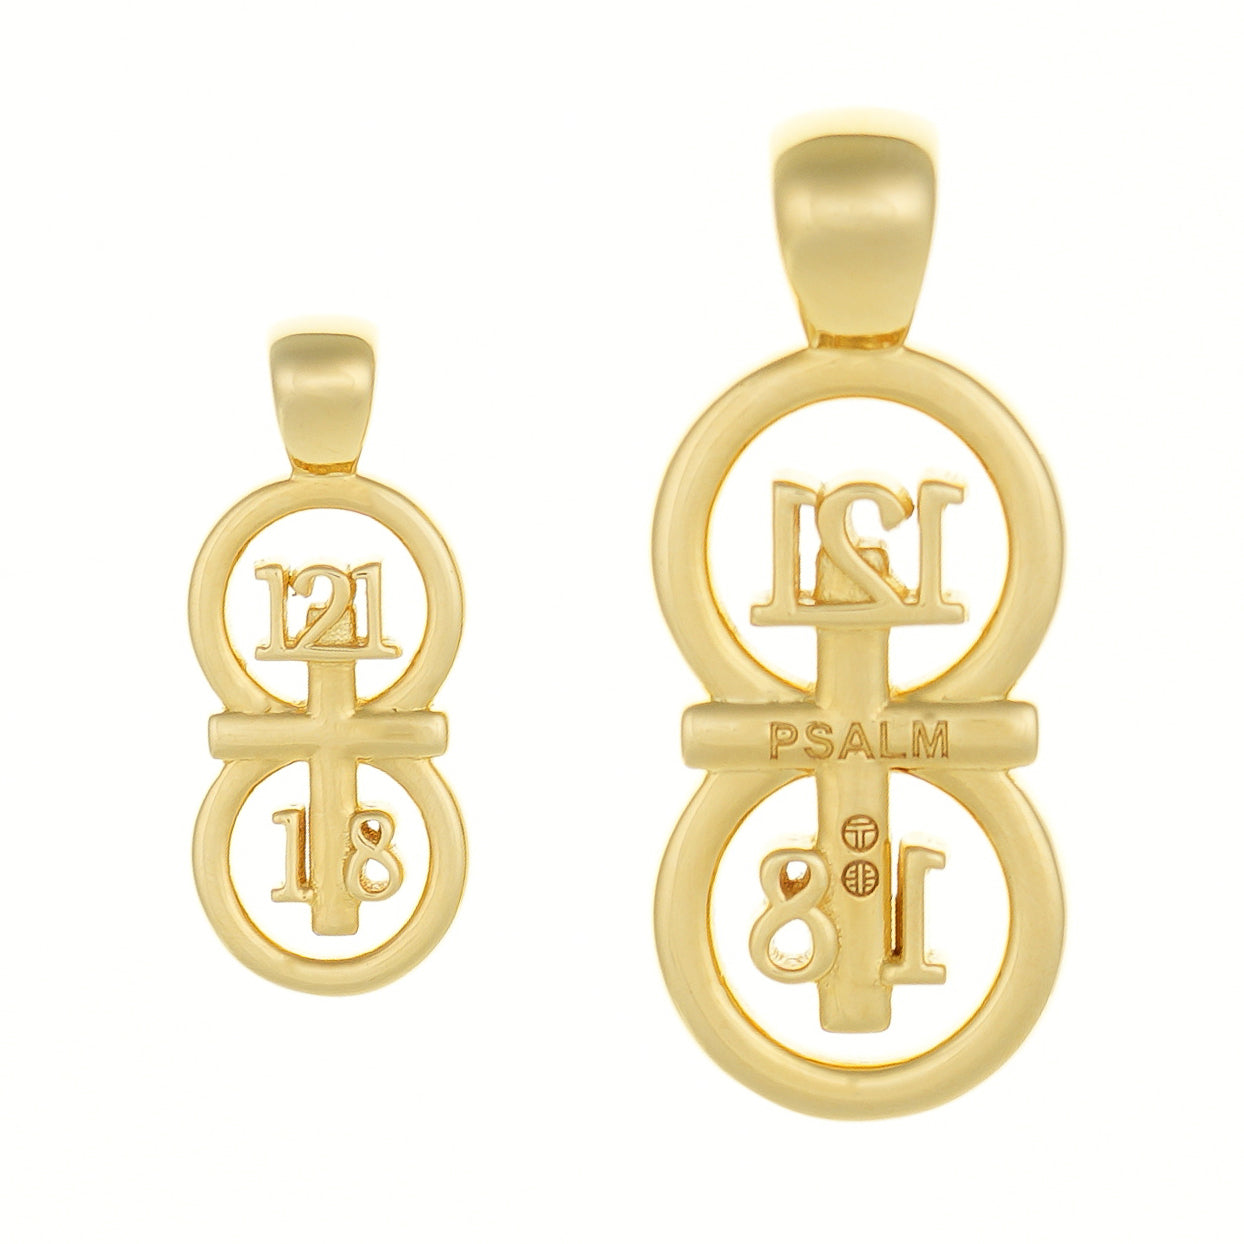 This image shows our small and large pendants side by side. This picture gives a good size comparison to each other. The RIYAN 29 and 11® pendant has the numbers 121, 1, and 8 intertwined with the cross to represent Psalm 121:1-8 with the chapter word "Psalm" inscribed on the back.